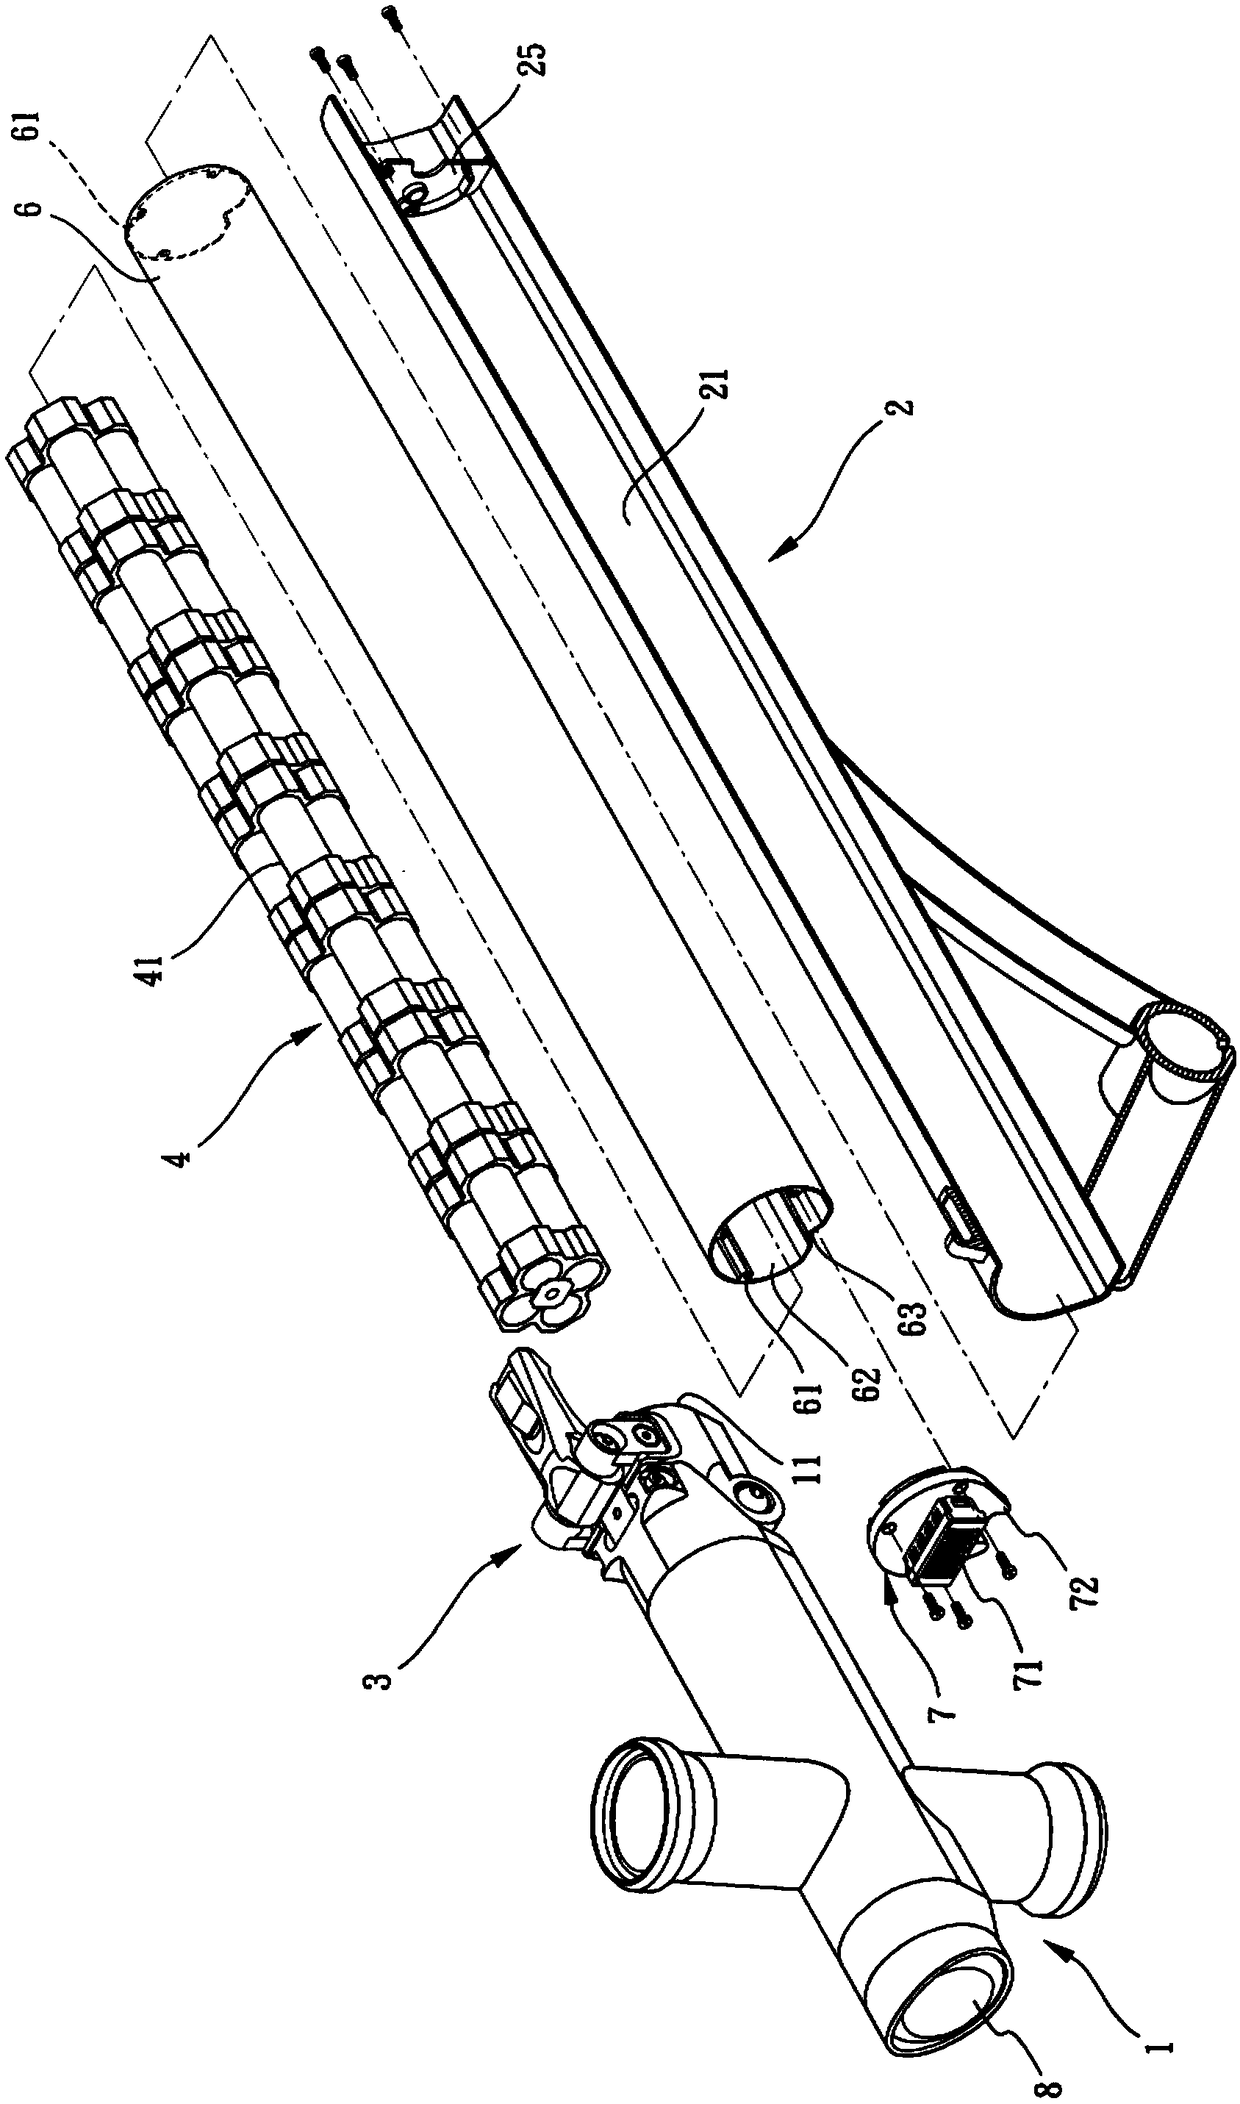 Bicycle pipe support capable of accommodating battery and being bent